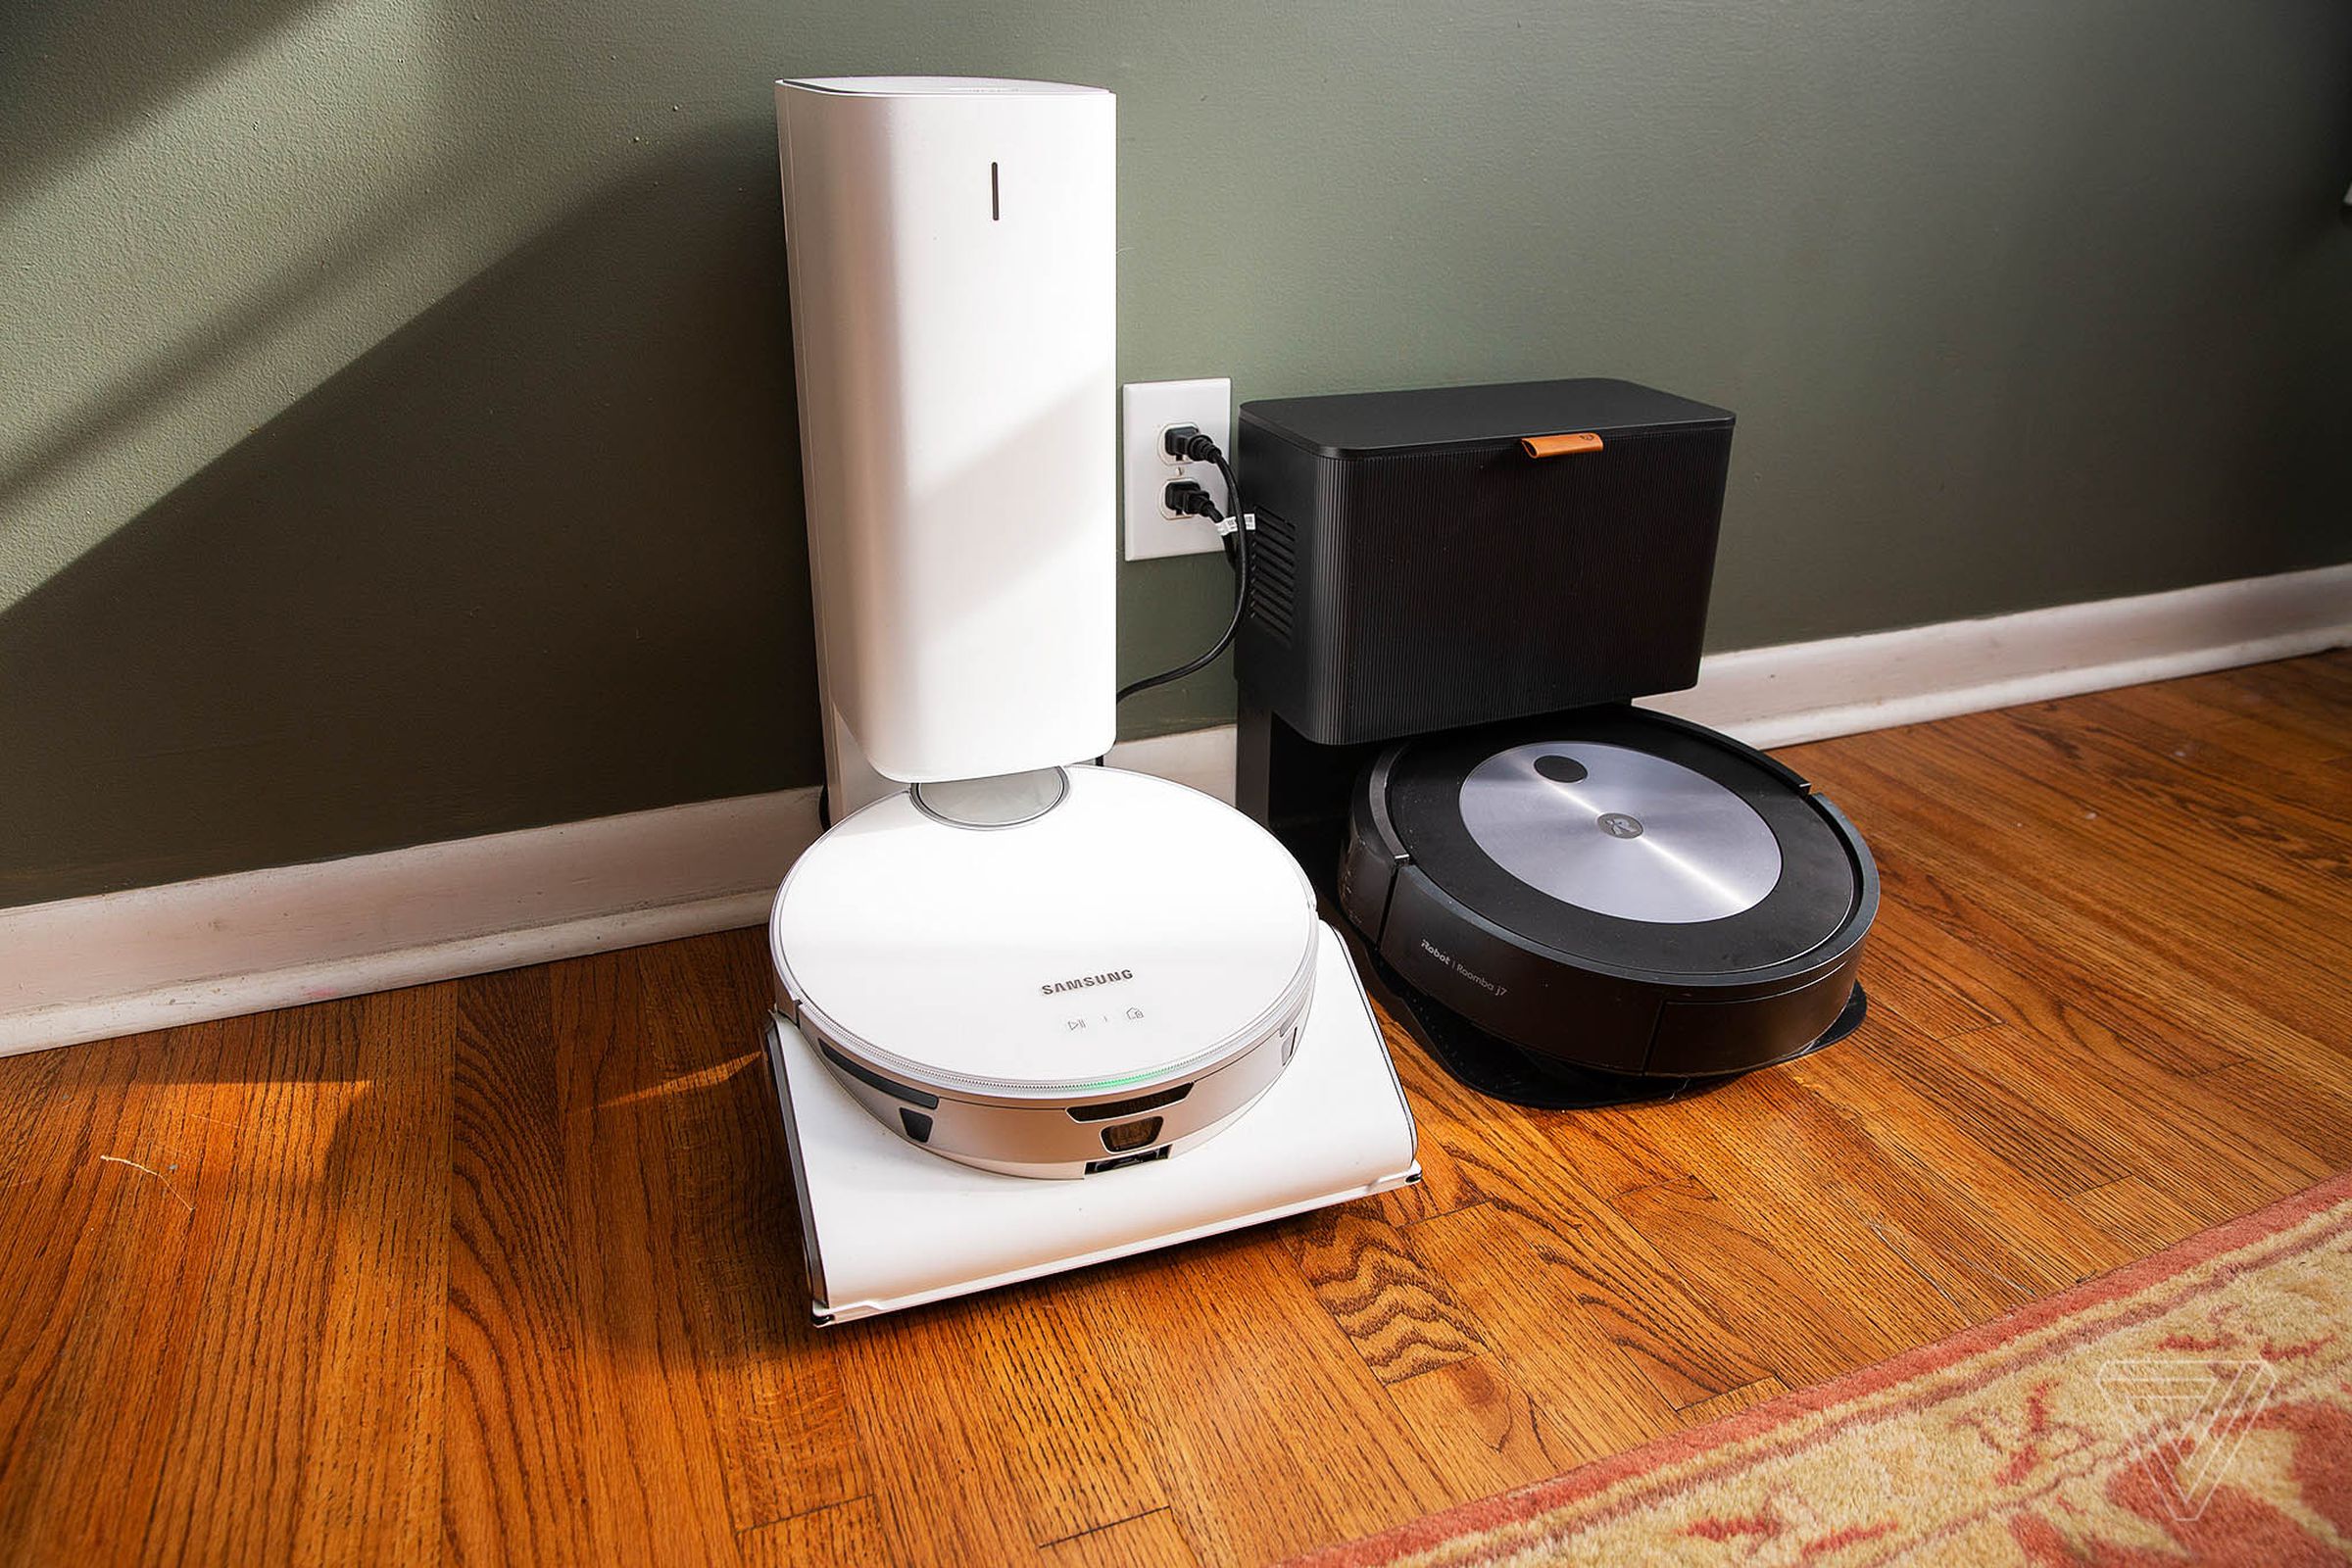 The Roomba j7 Plus and Samsung JetBot AI Plus both come with charging docks that can auto-empty the robot’s dustbin. These can hold two to three months of debris before being replaced, depending on use. 